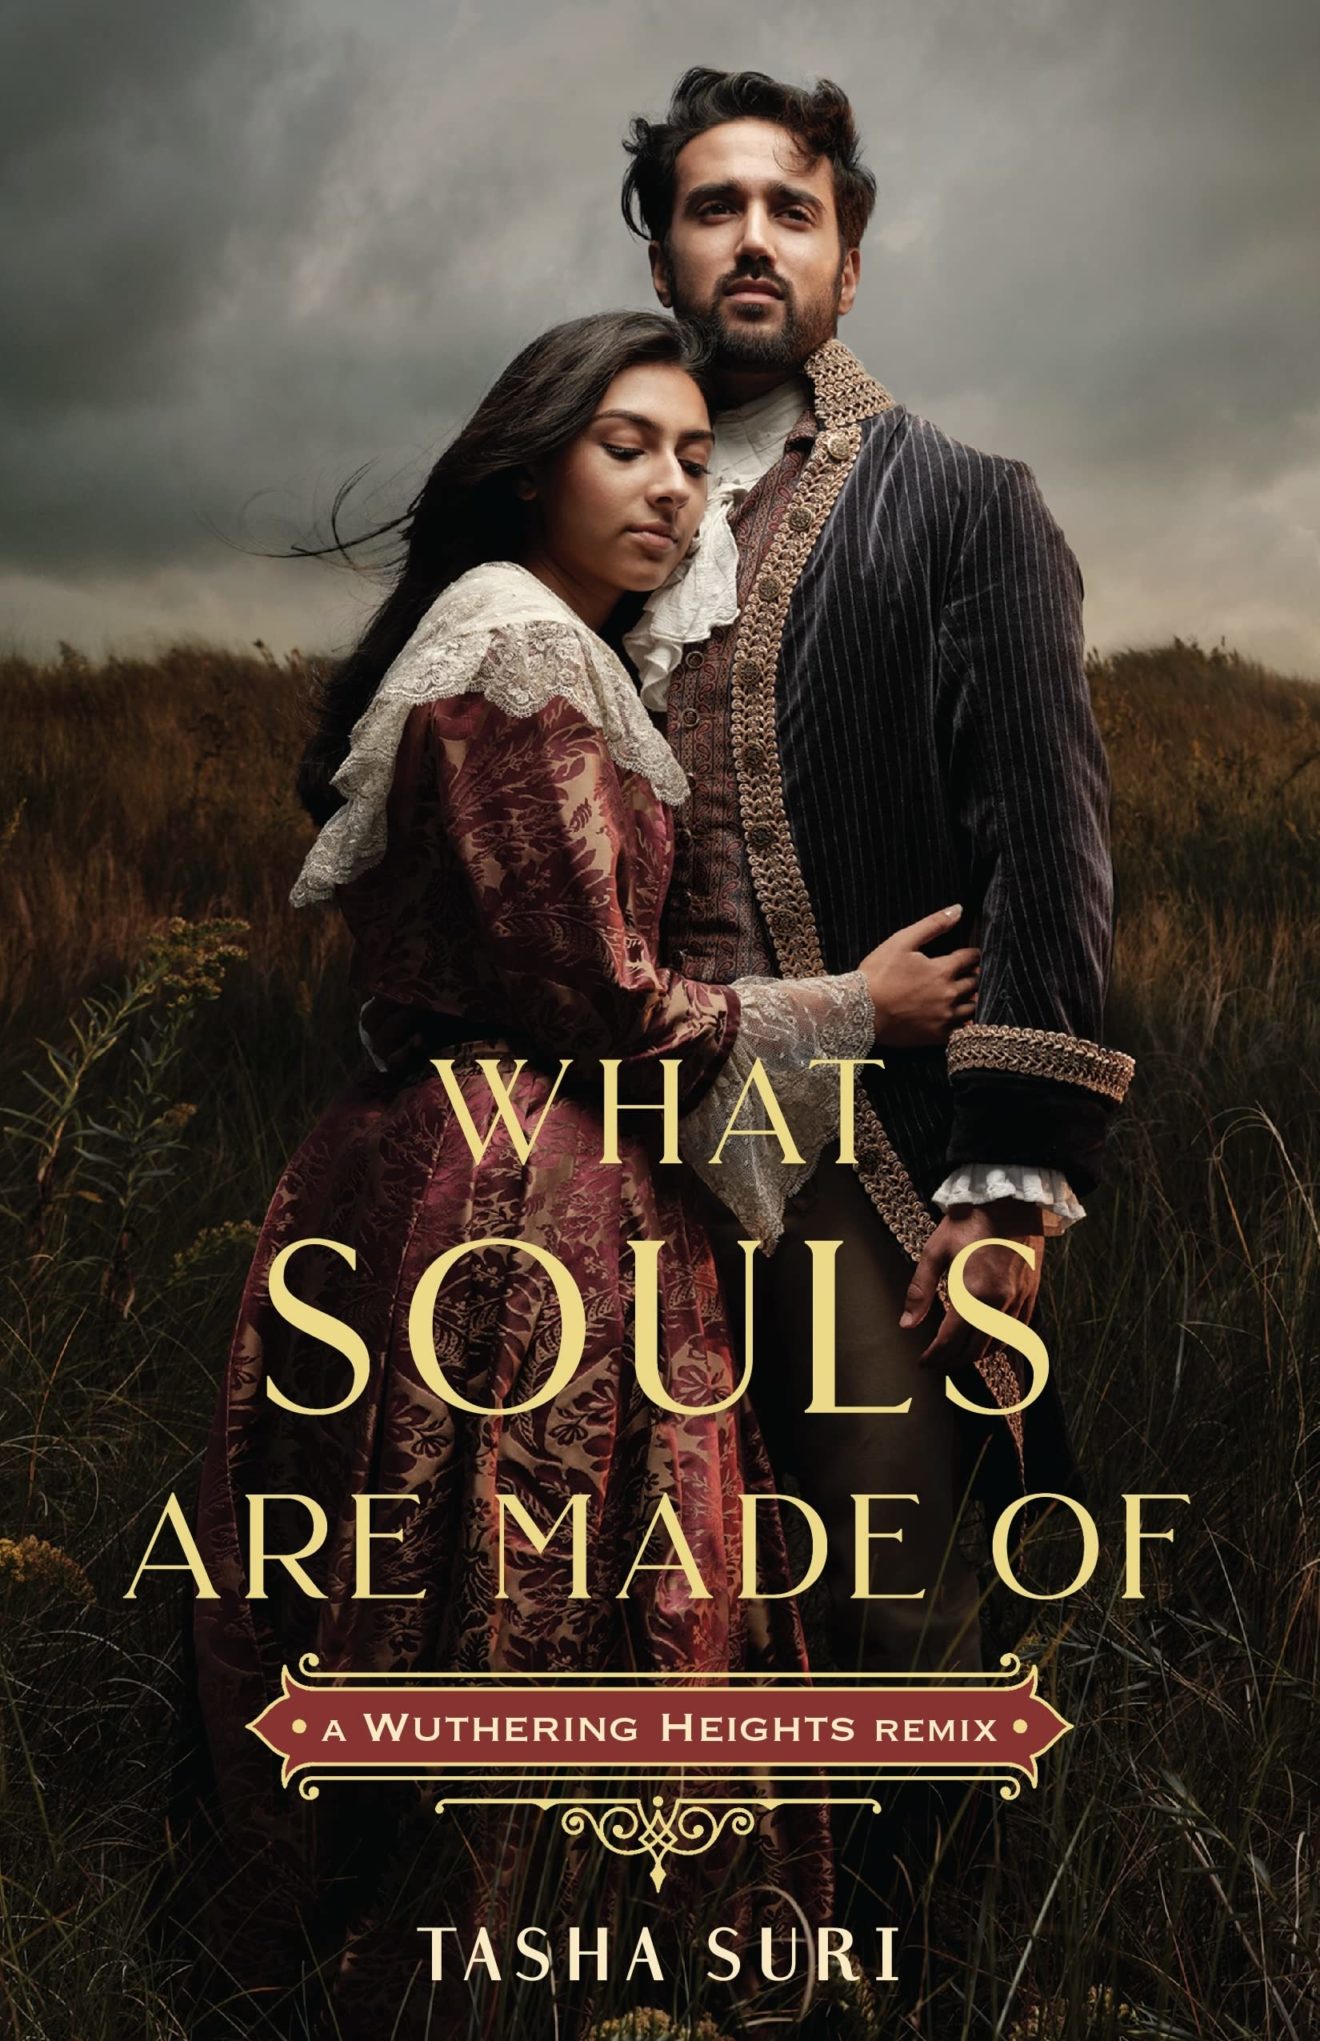 What Souls Are Made Of by Tasha Suri